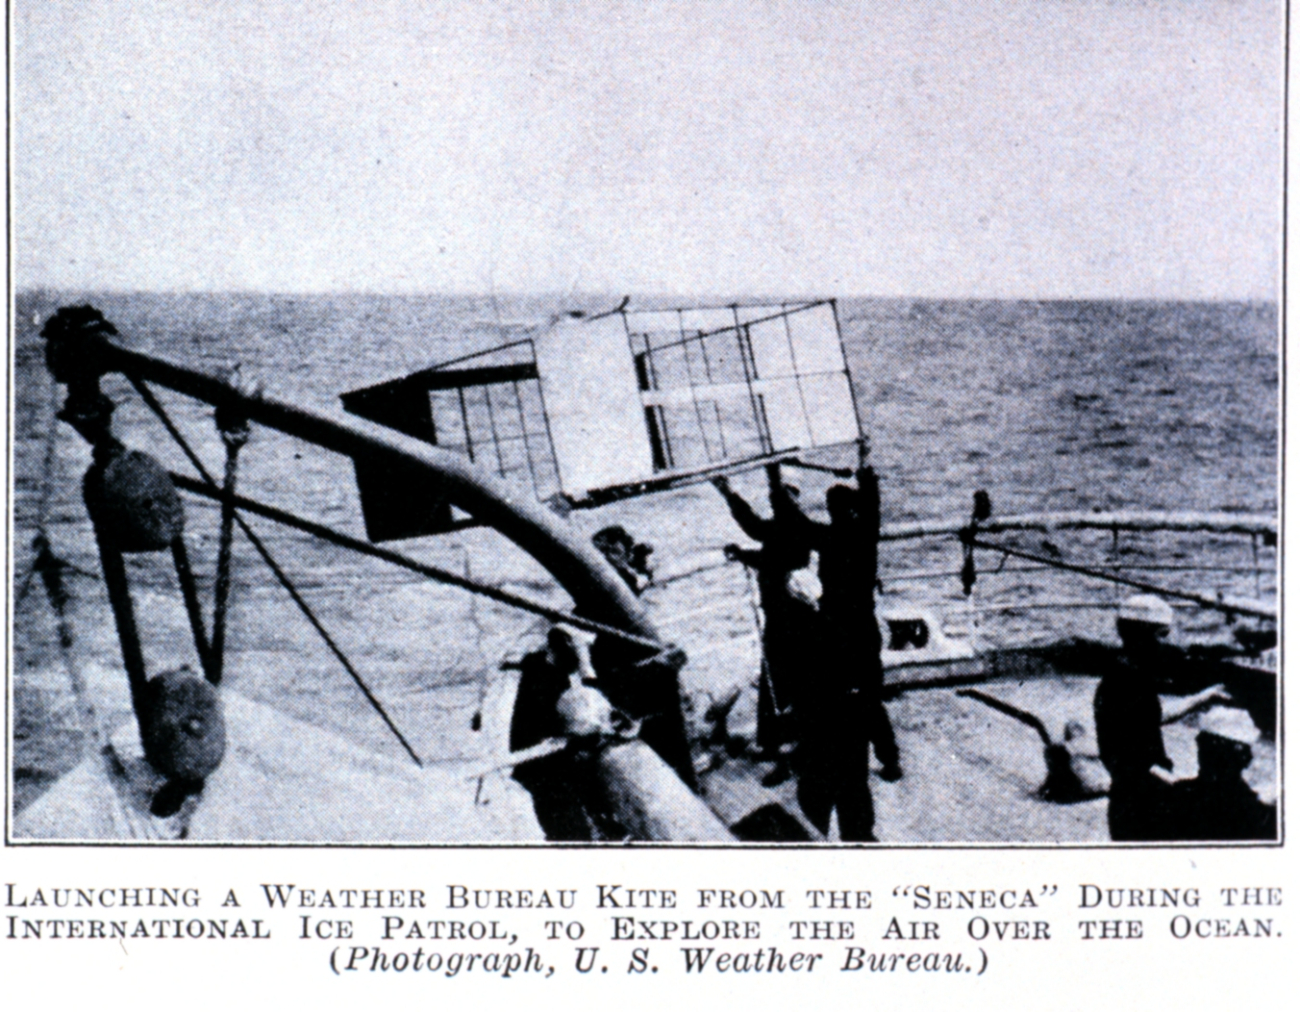 Launching a Weather Bureau Kite from the SENECA during the InternationalIce Patrol, to Explore the Air over the Ocean